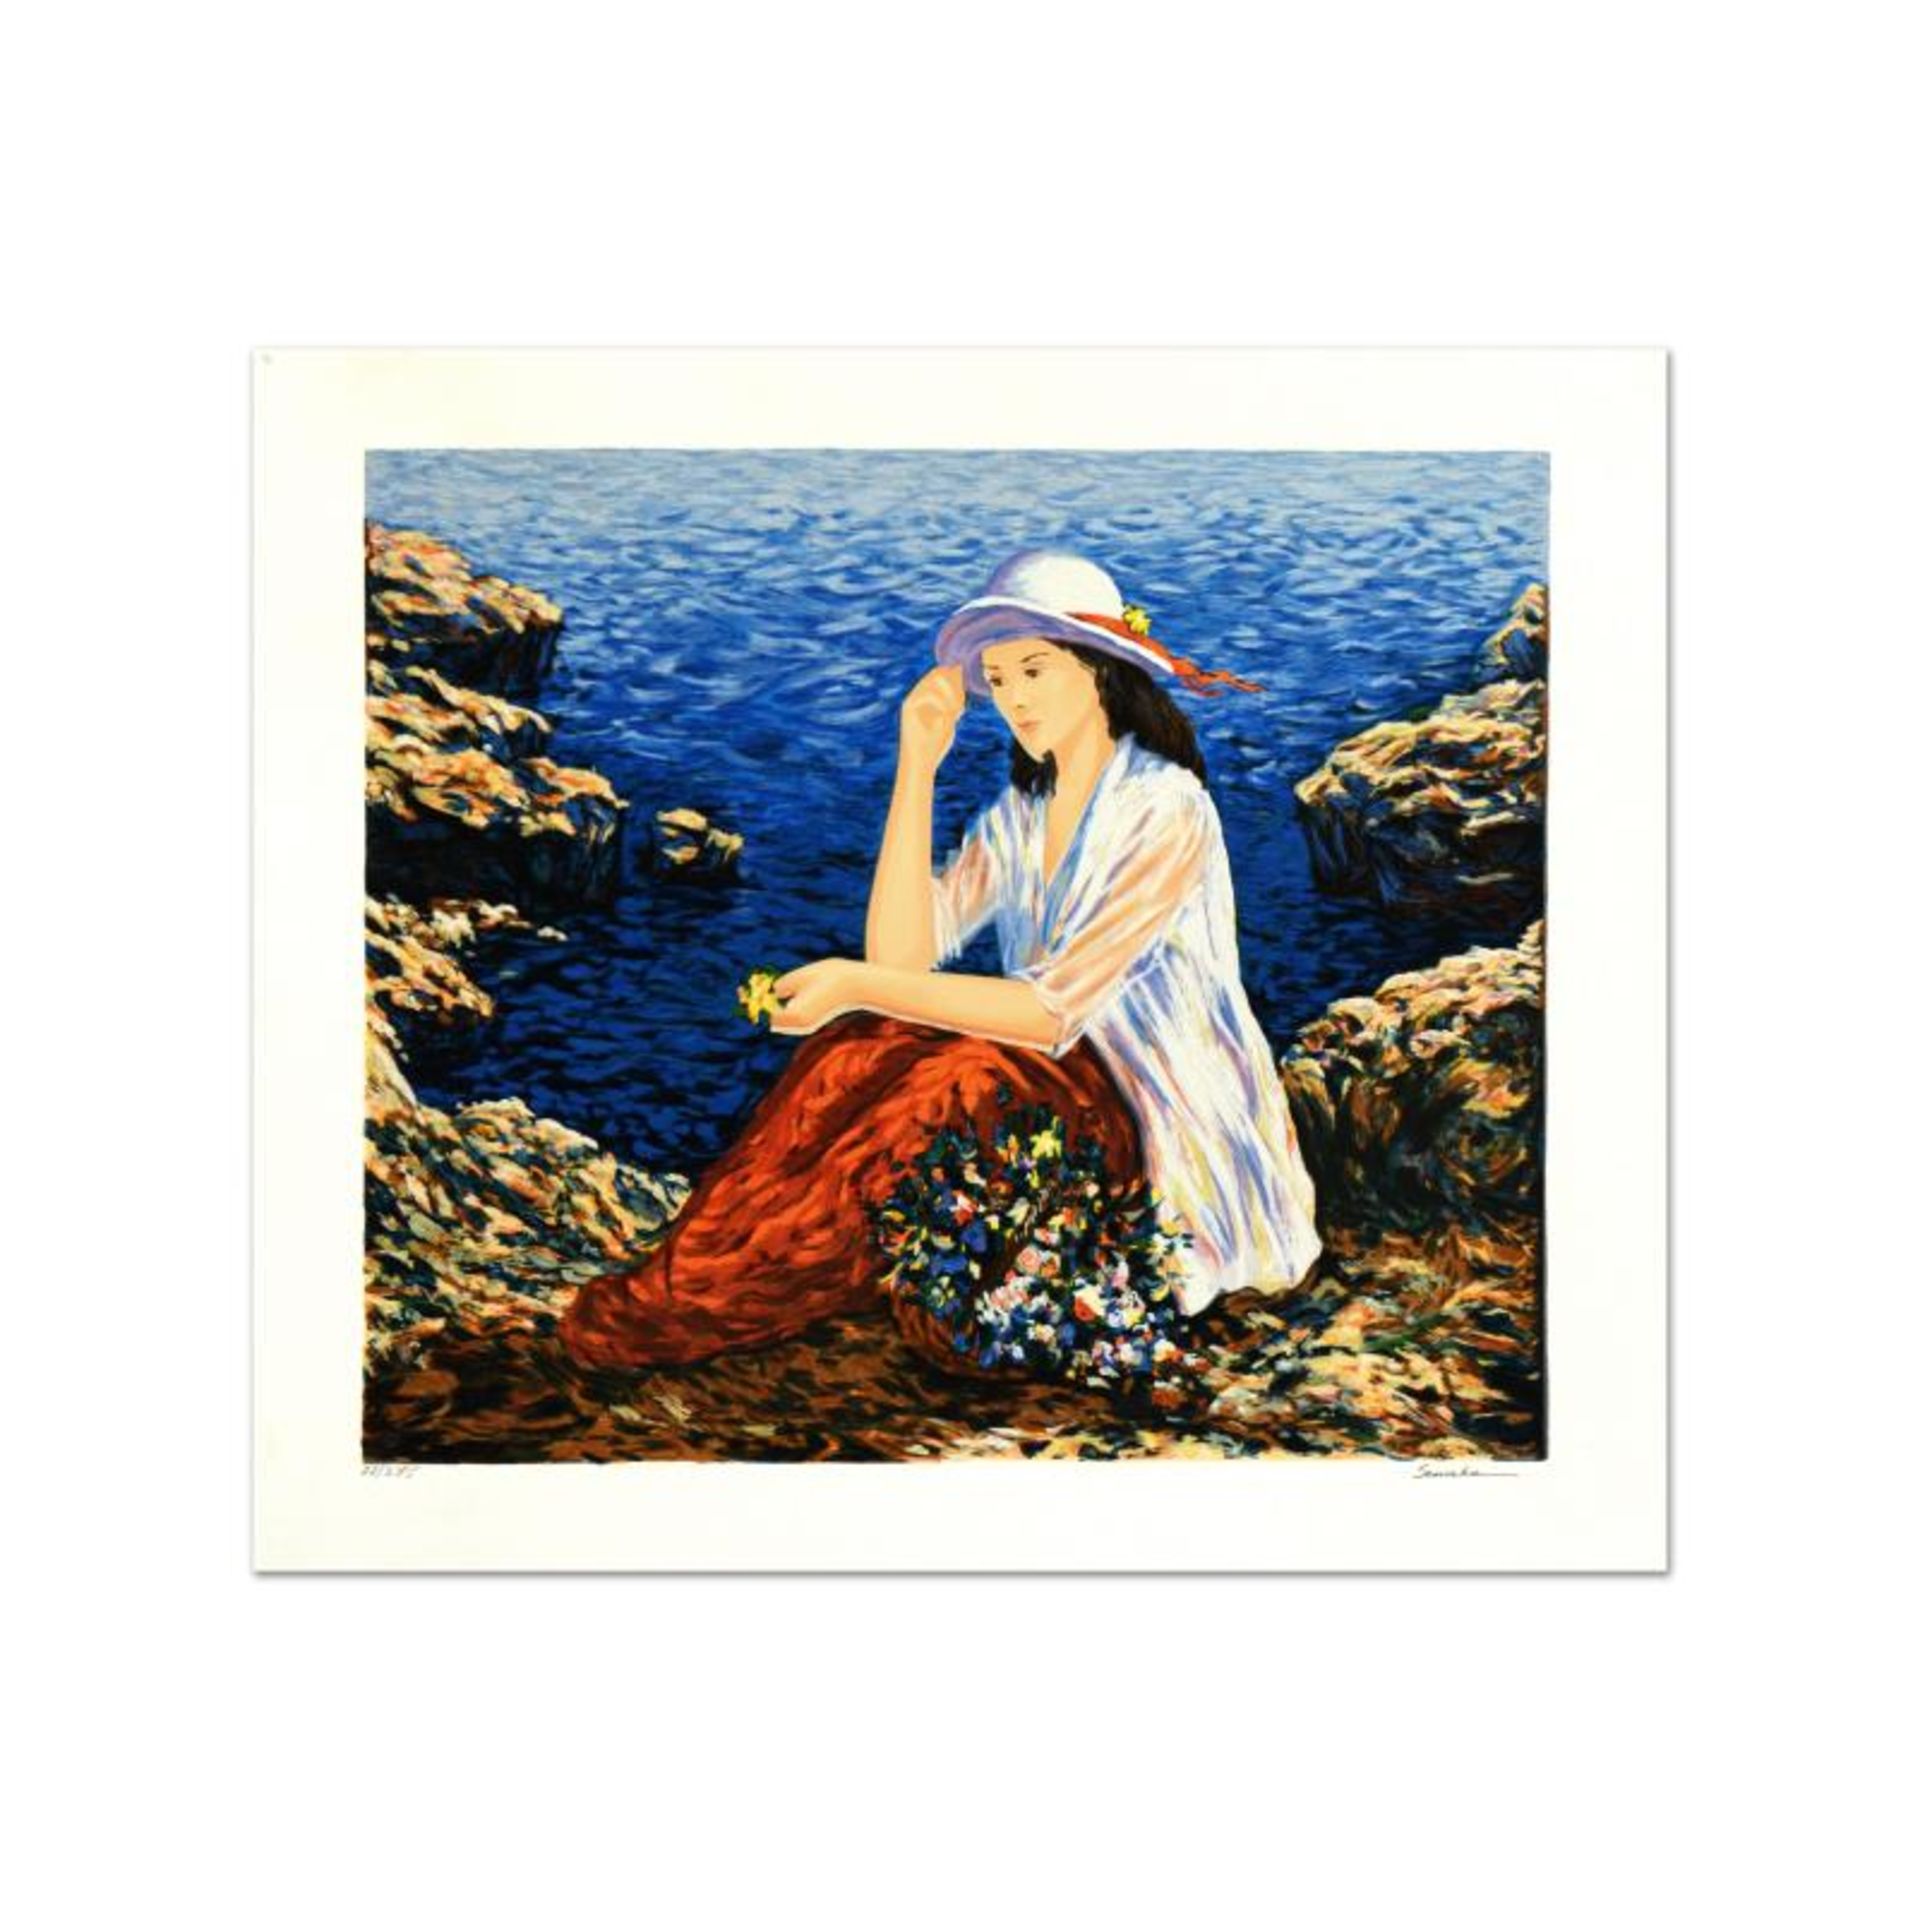 Igor Semeko, "Lady by the Cliffside" Limited Edition Serigraph, Numbered and Han